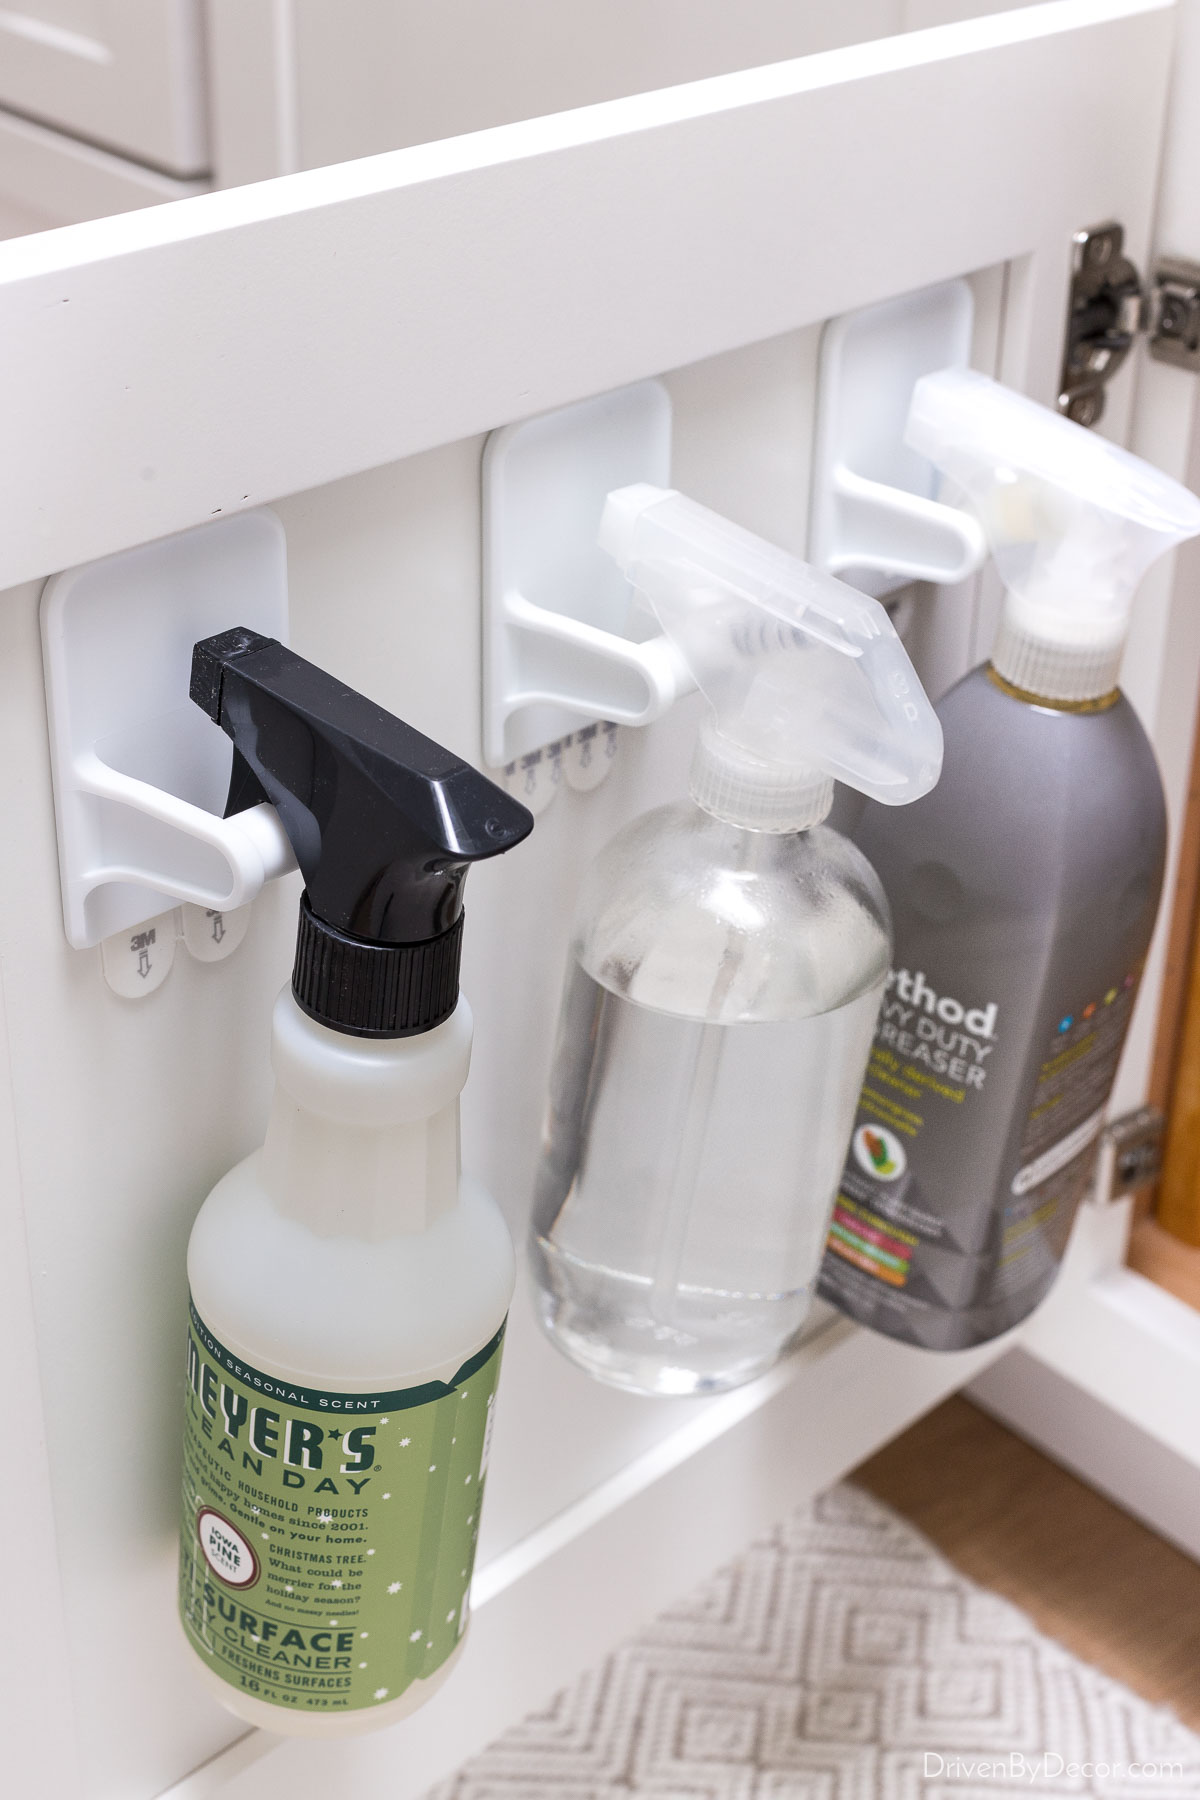 These genius hooks are perfect for holding spray bottles on the back of bathroom cabinet doors